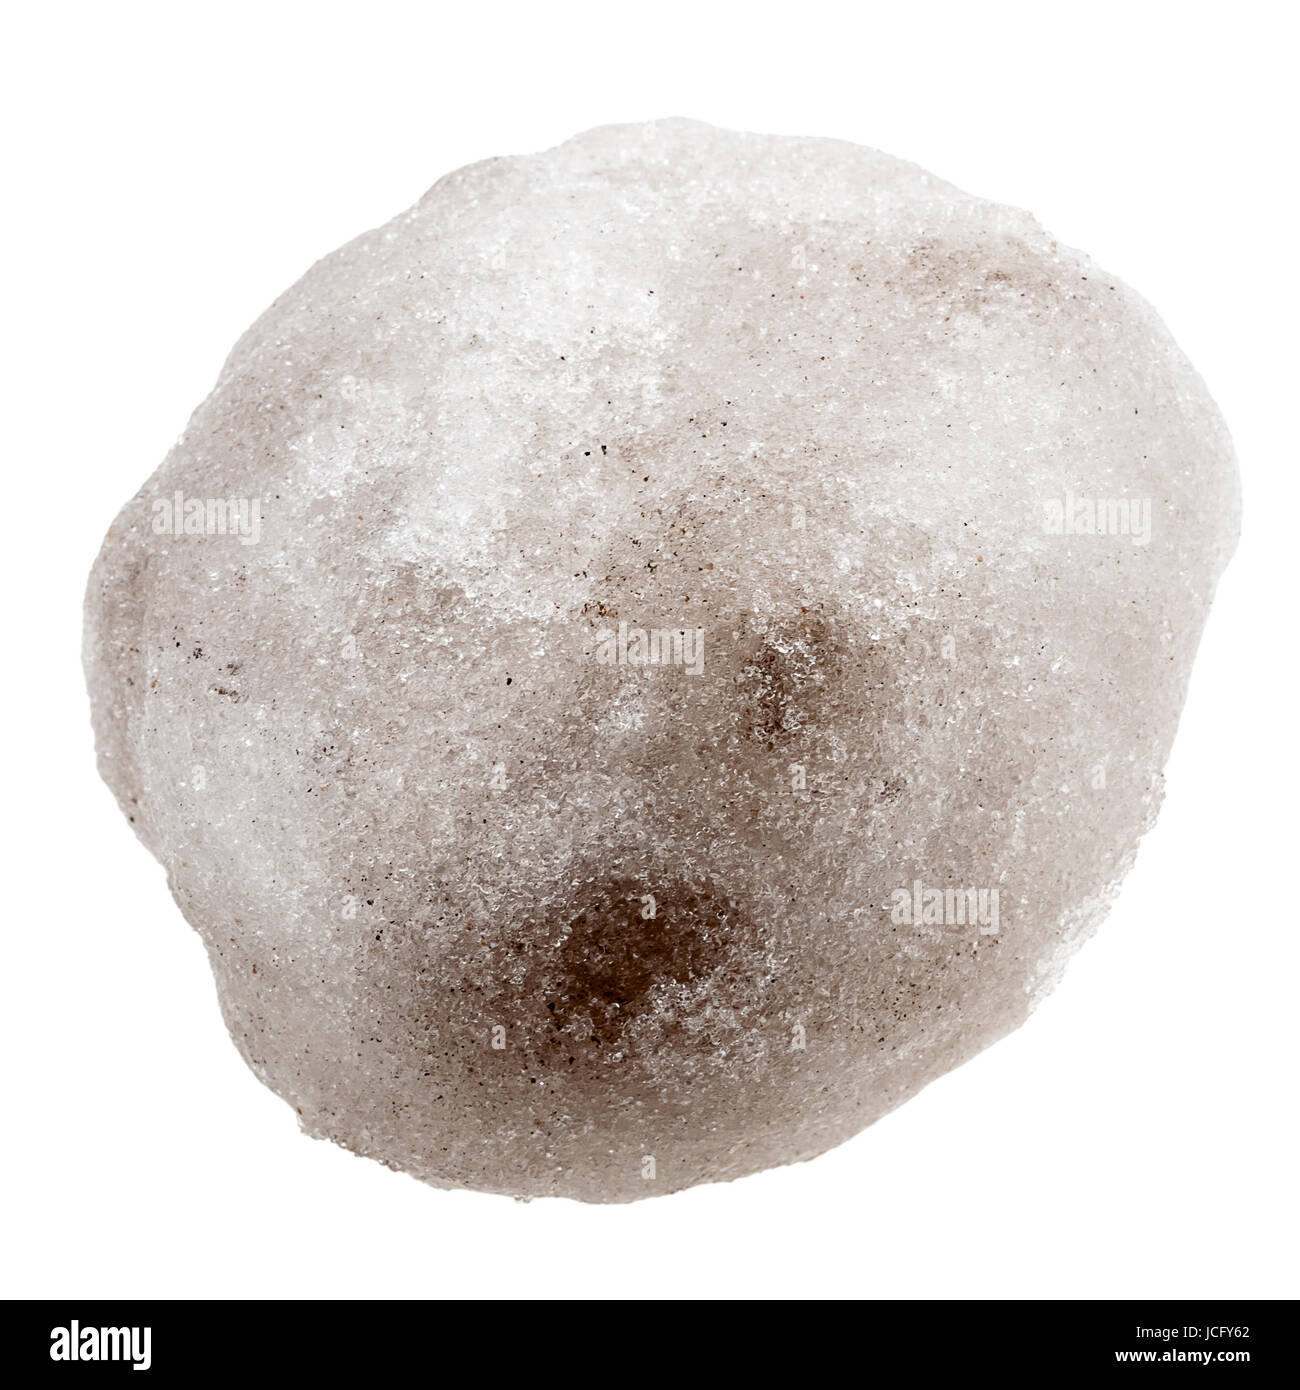 Dirty snowball or hailstone isolated on a white background Stock Photo